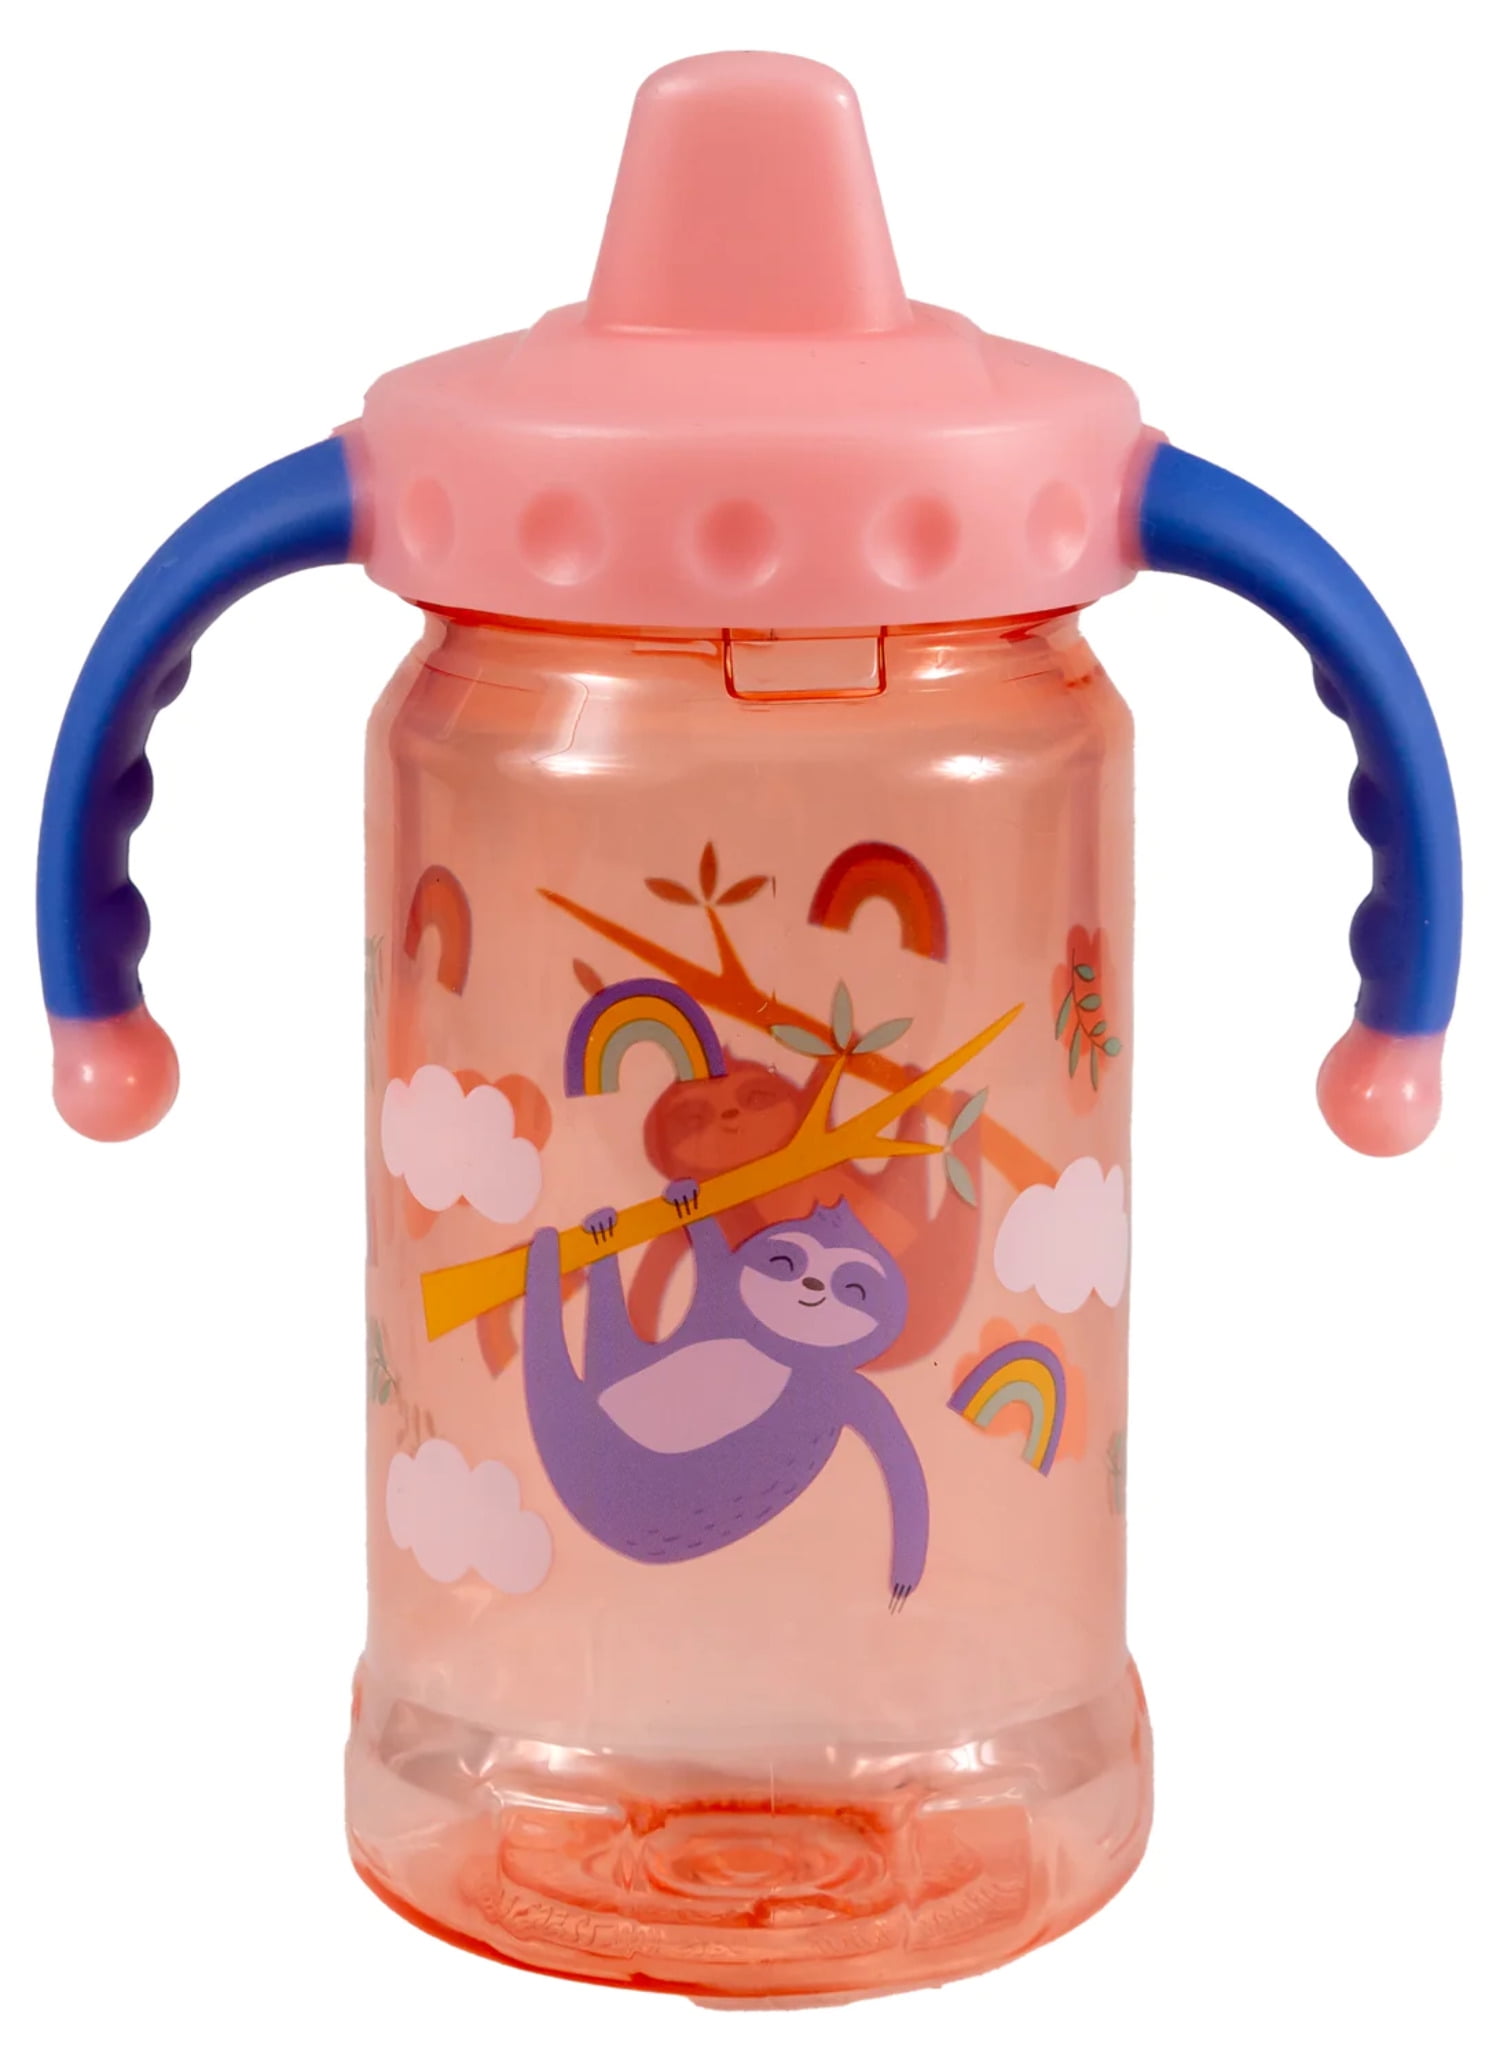 PAIR OF COLORFUL WATER BOTTLES: NALGENE AND COOL GEAR ONE IS SIPPY CUP  STYLE